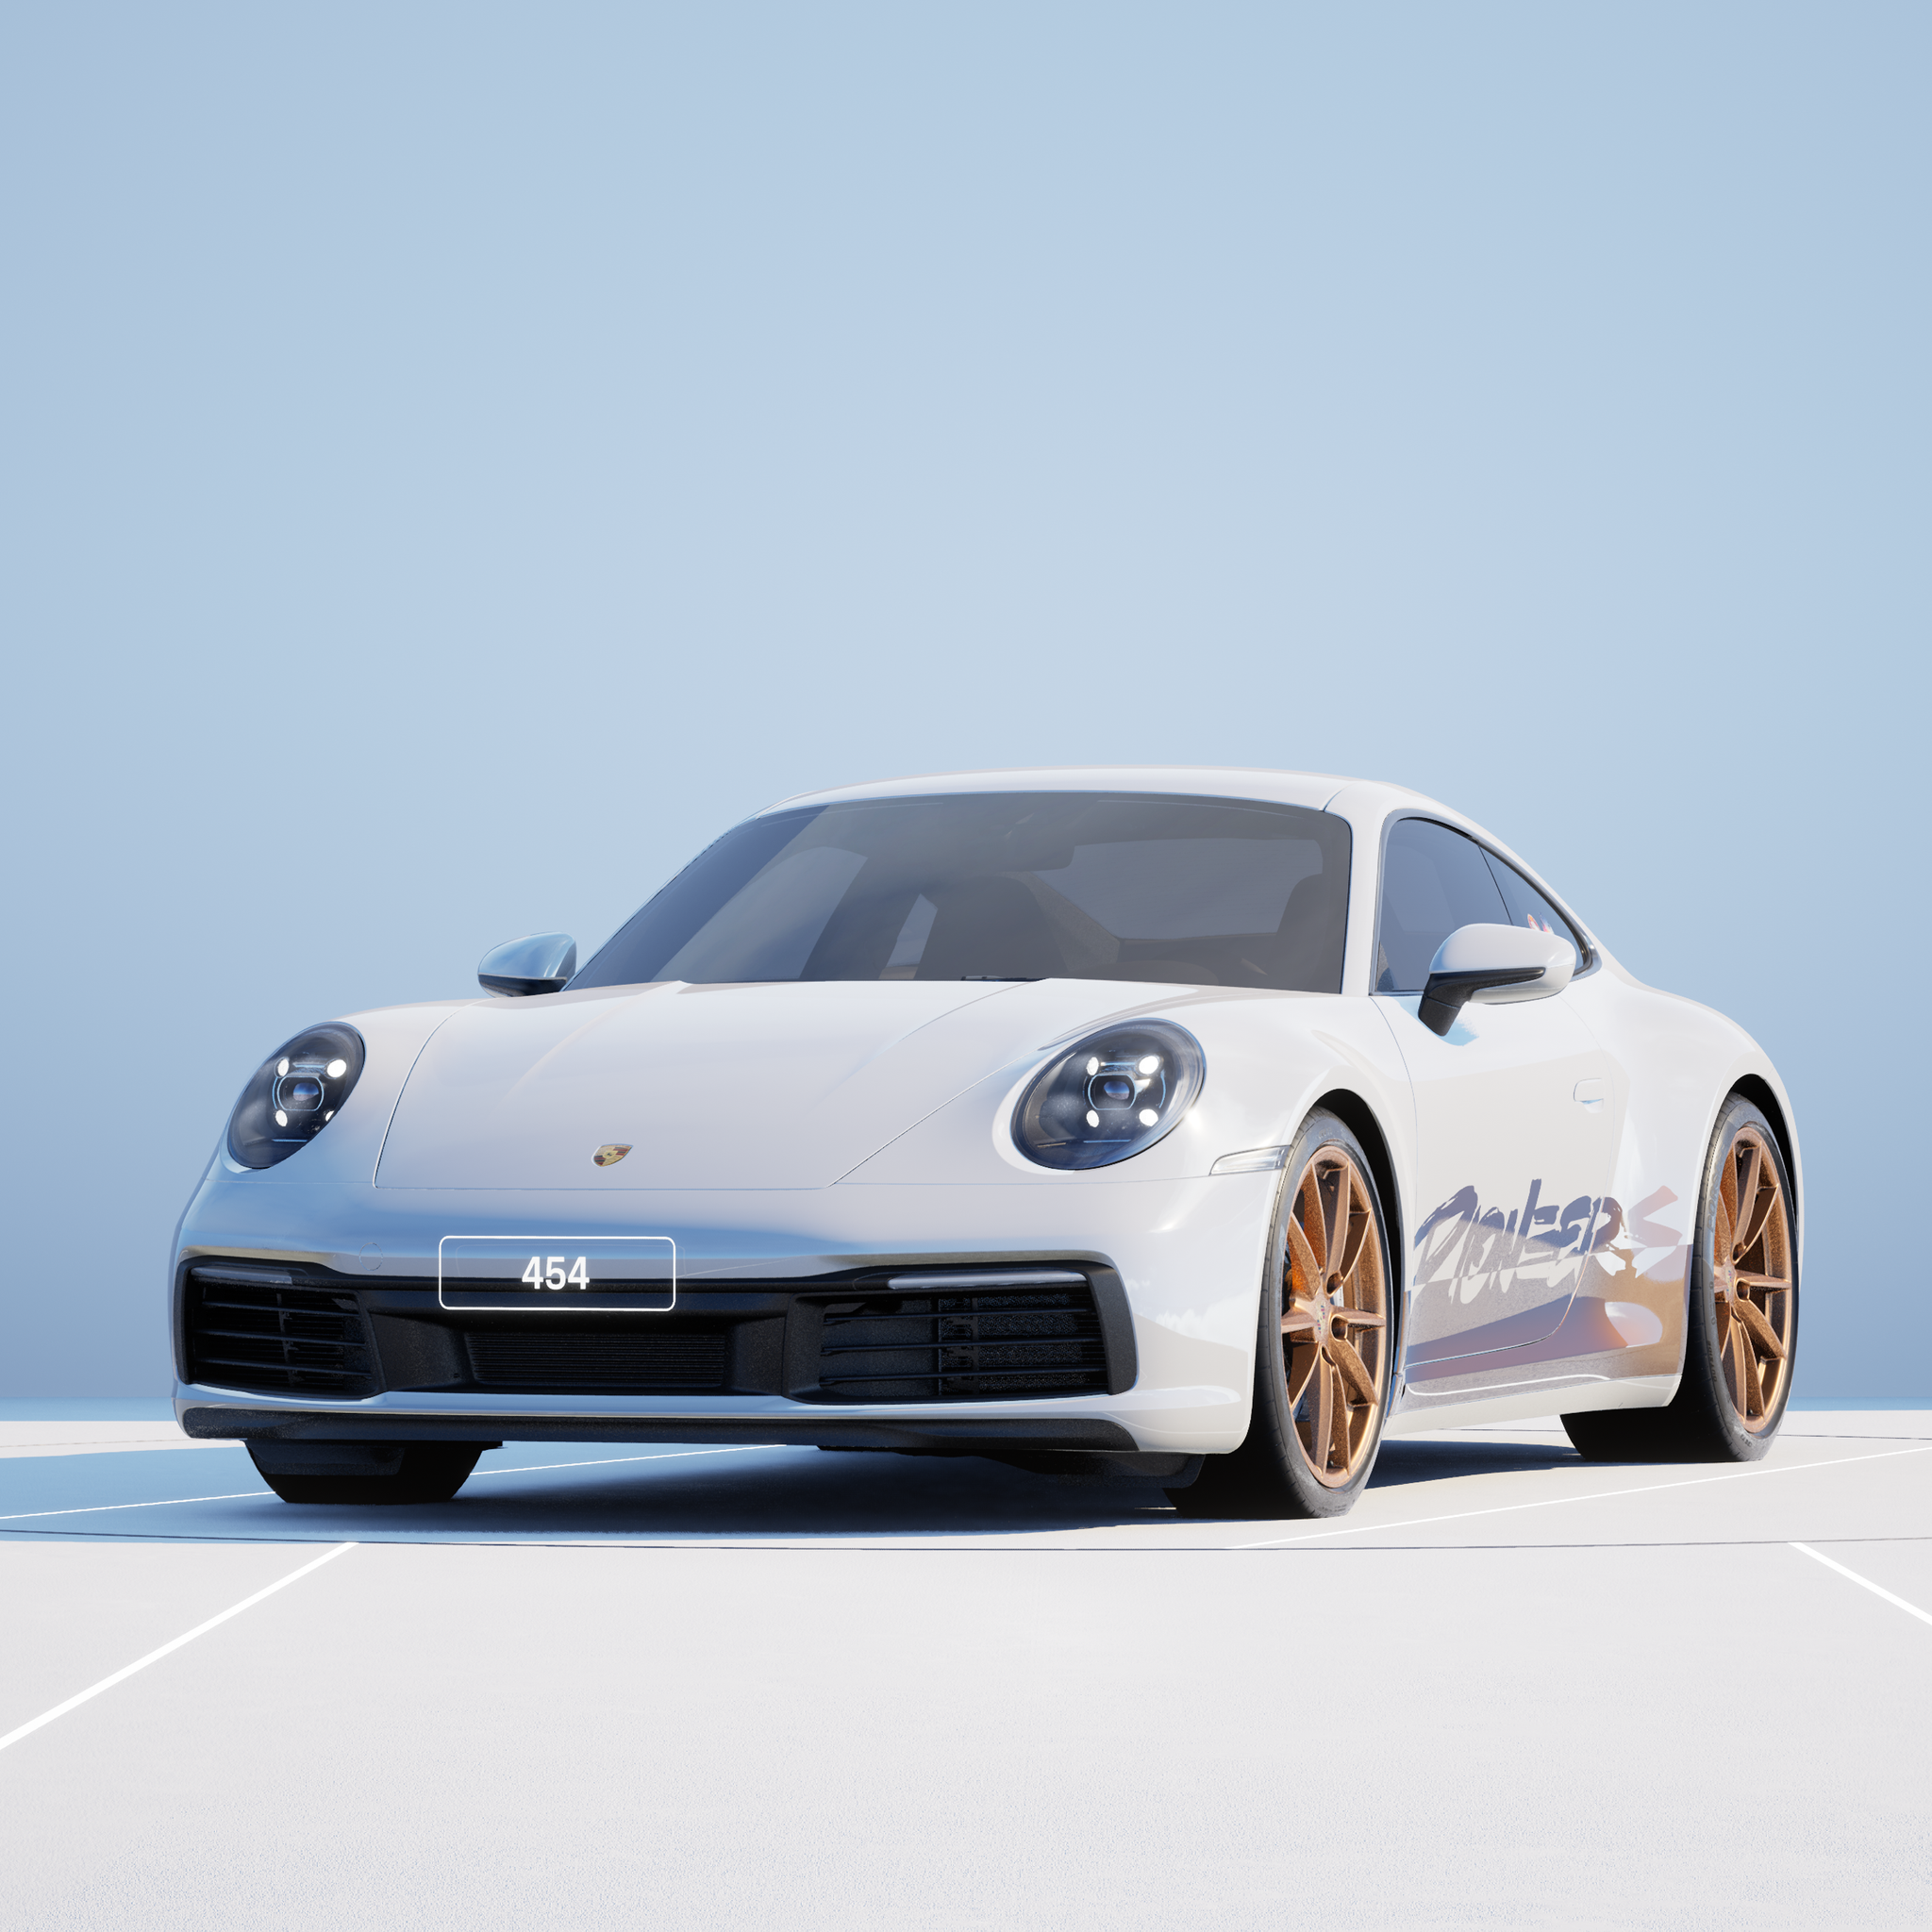 The PORSCHΞ 911 454 image in phase